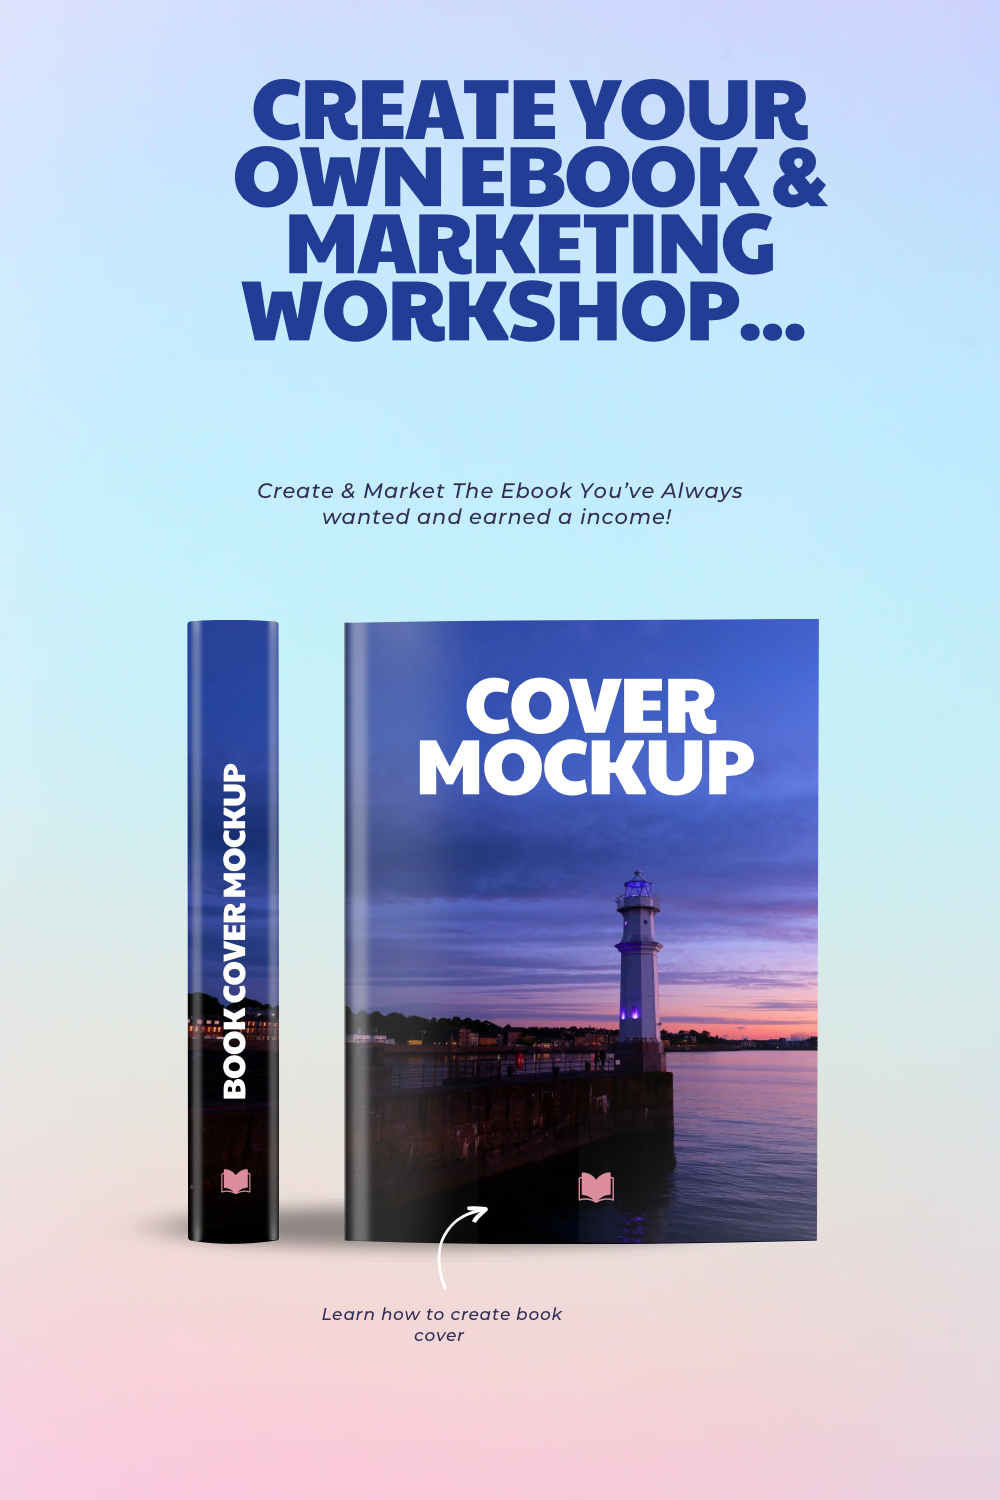 Create Your Own Ebook “WorkShop”